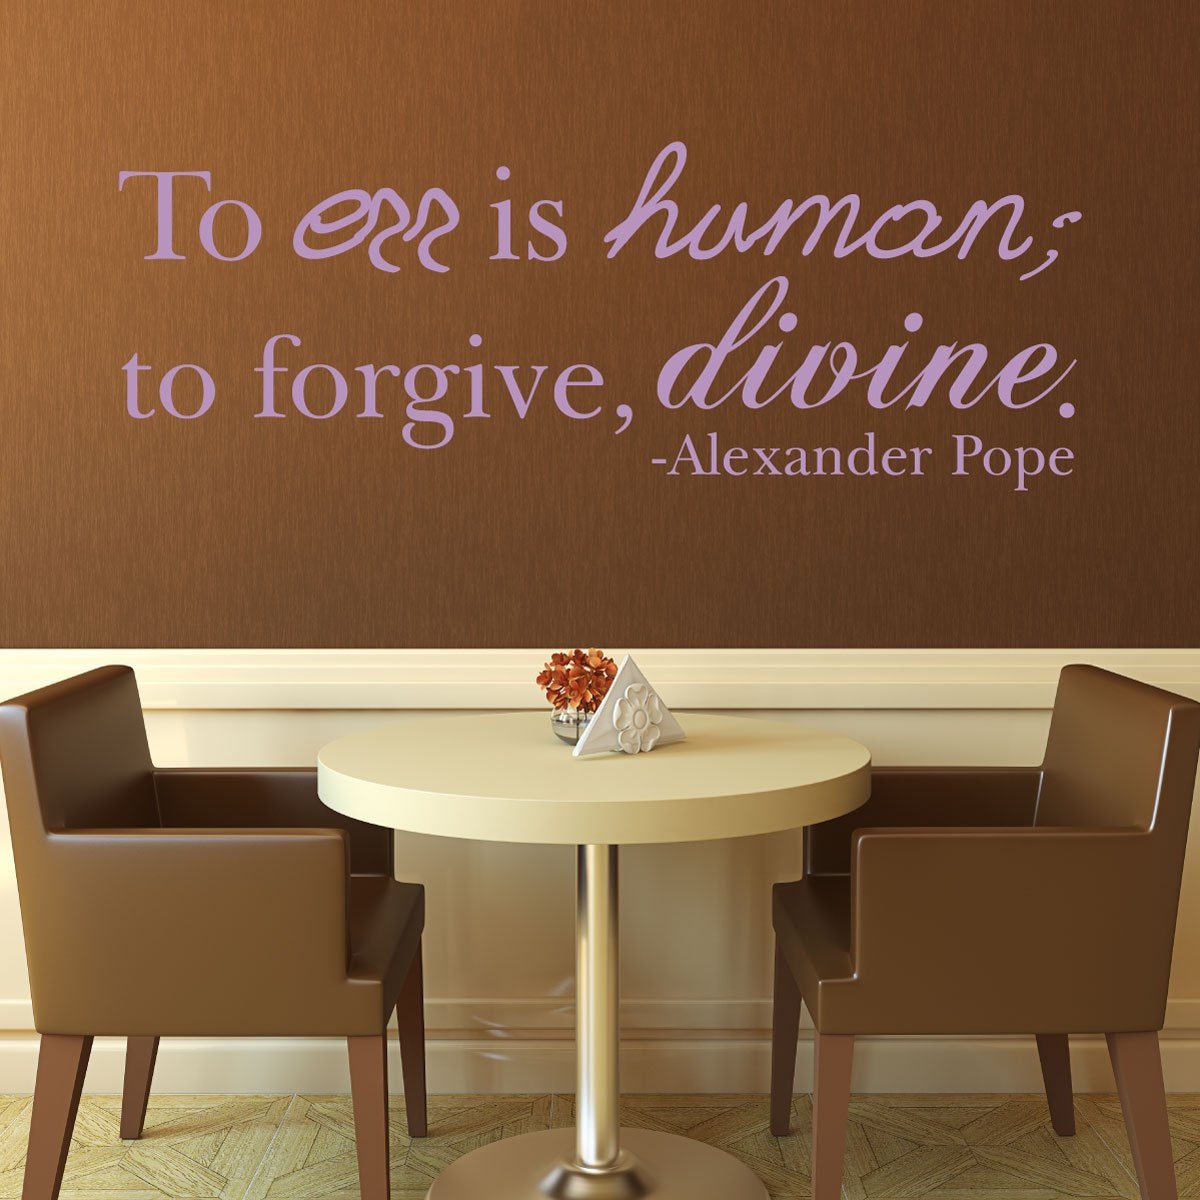 to err is human to forgive is divine discuss